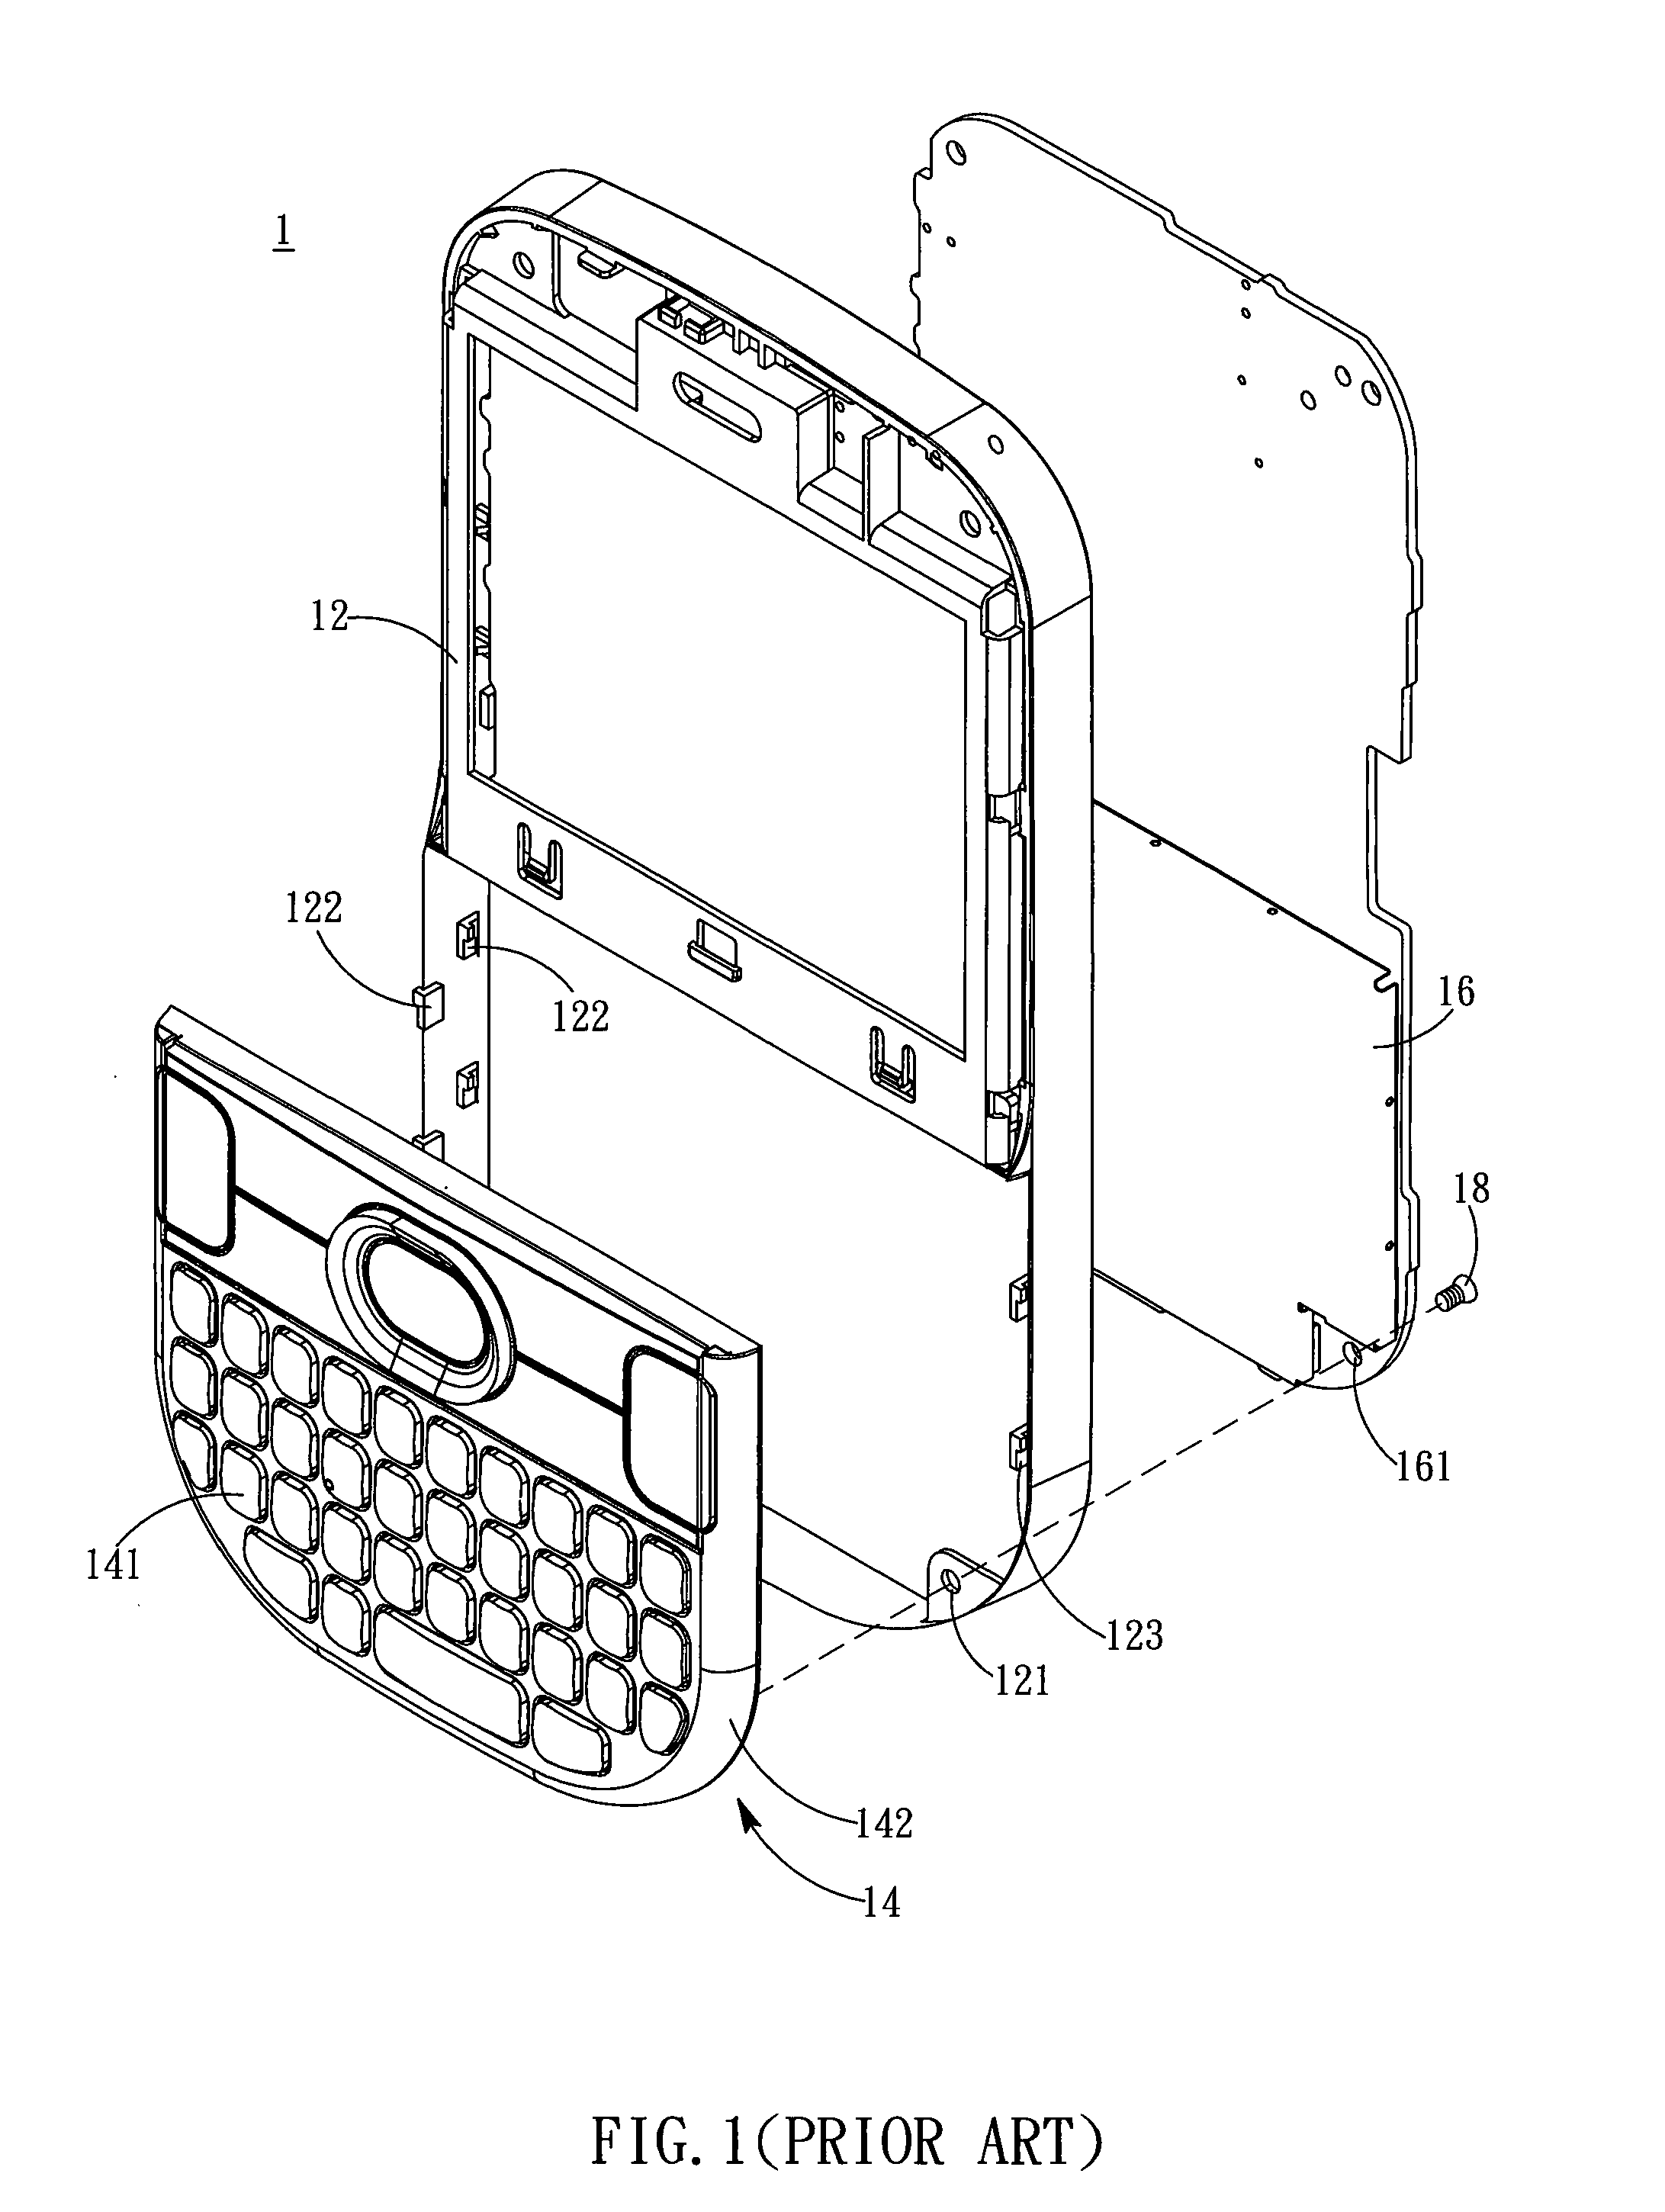 Electronic device with detachable keypad module